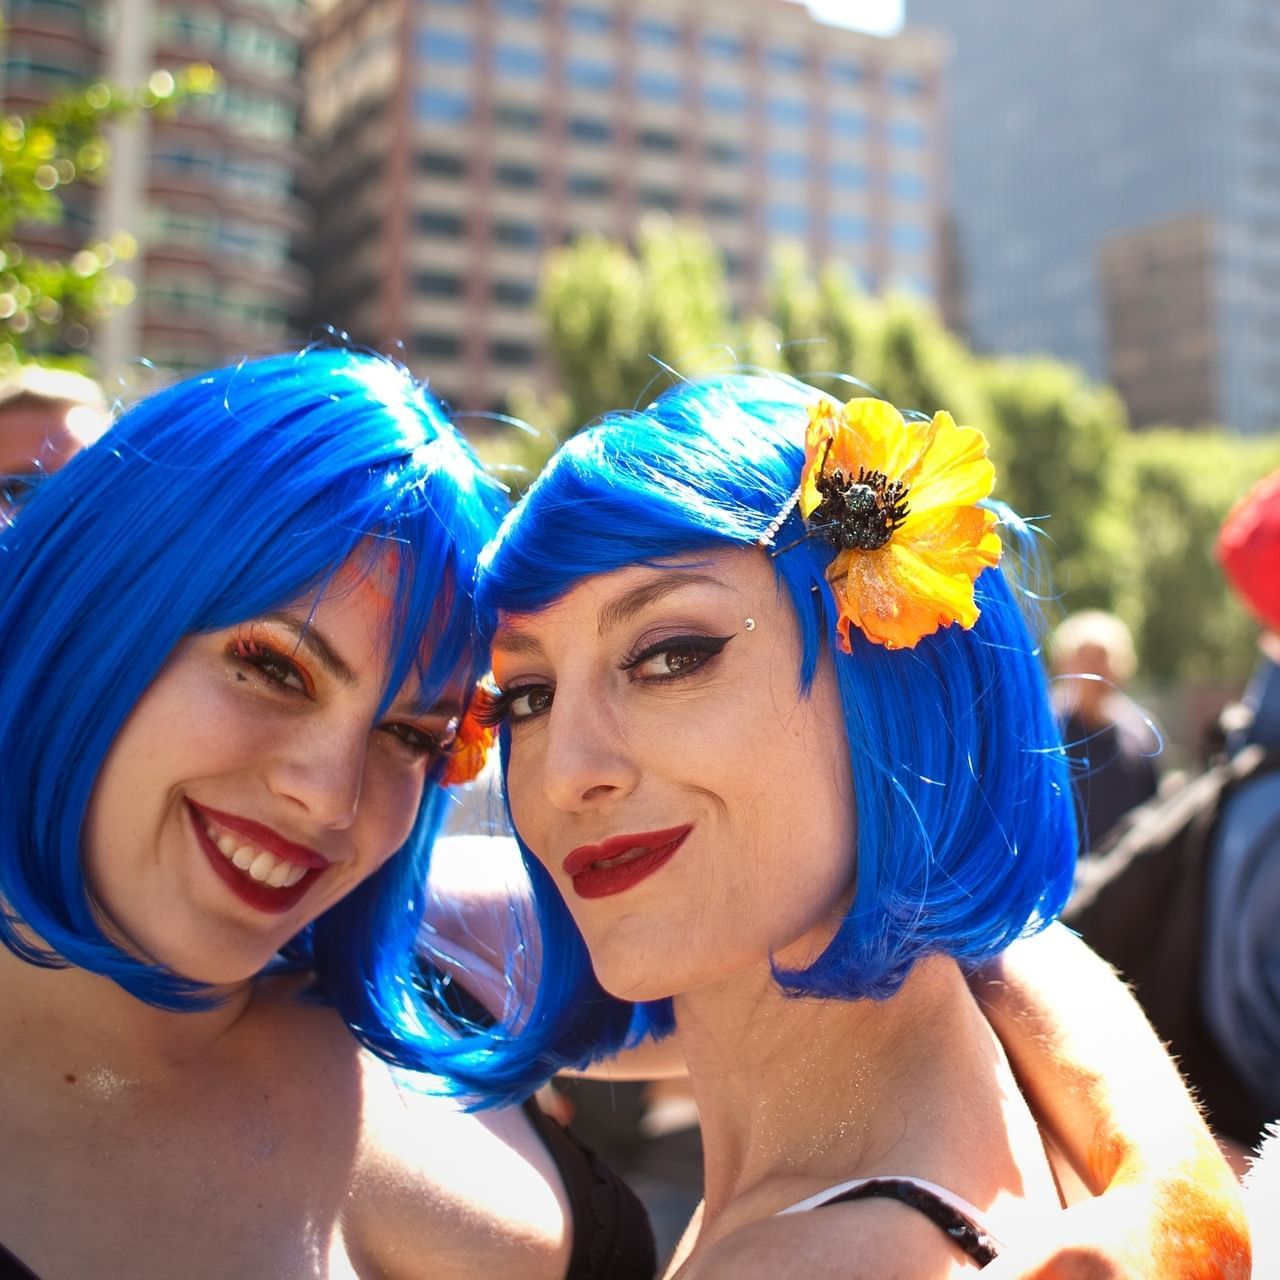 Close-up of two women posing with a smile in Folsom Street Fair near Becks Motor Lodge